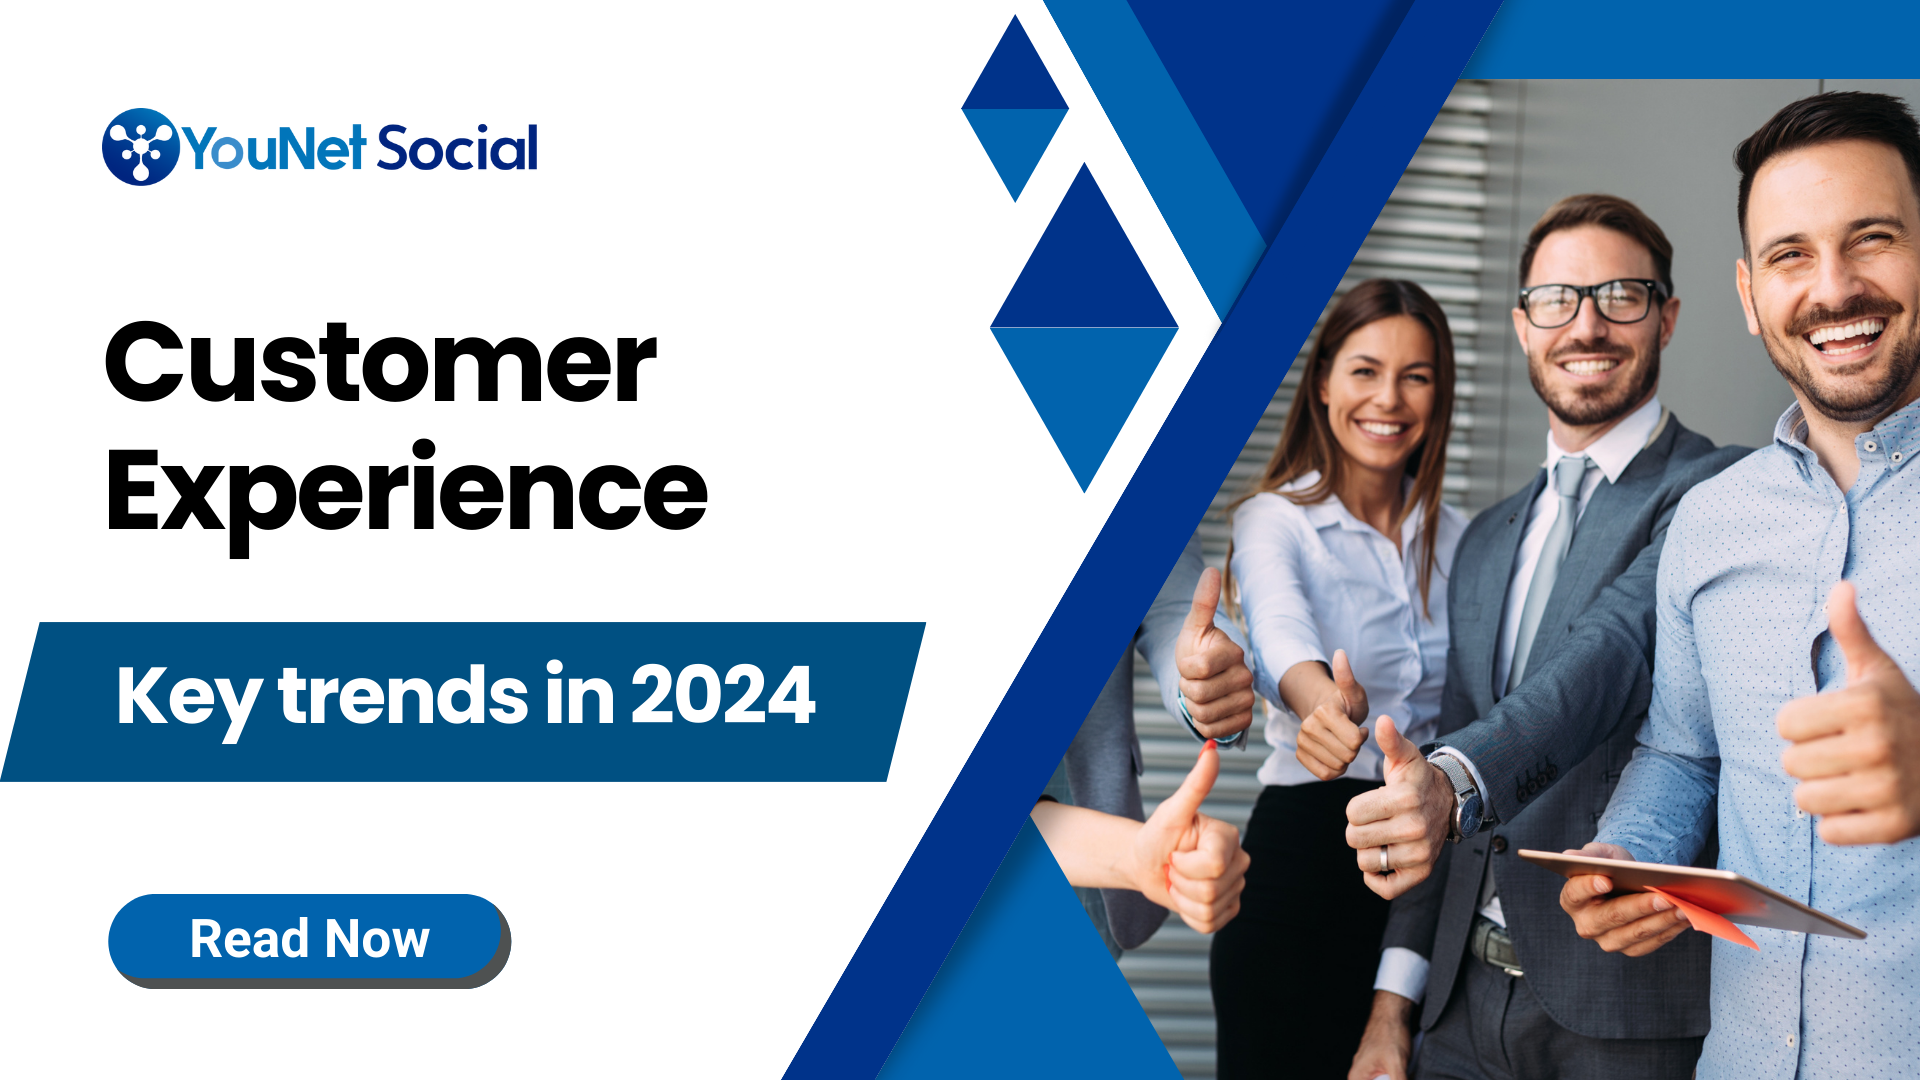 Customer Experience key trends in 2024